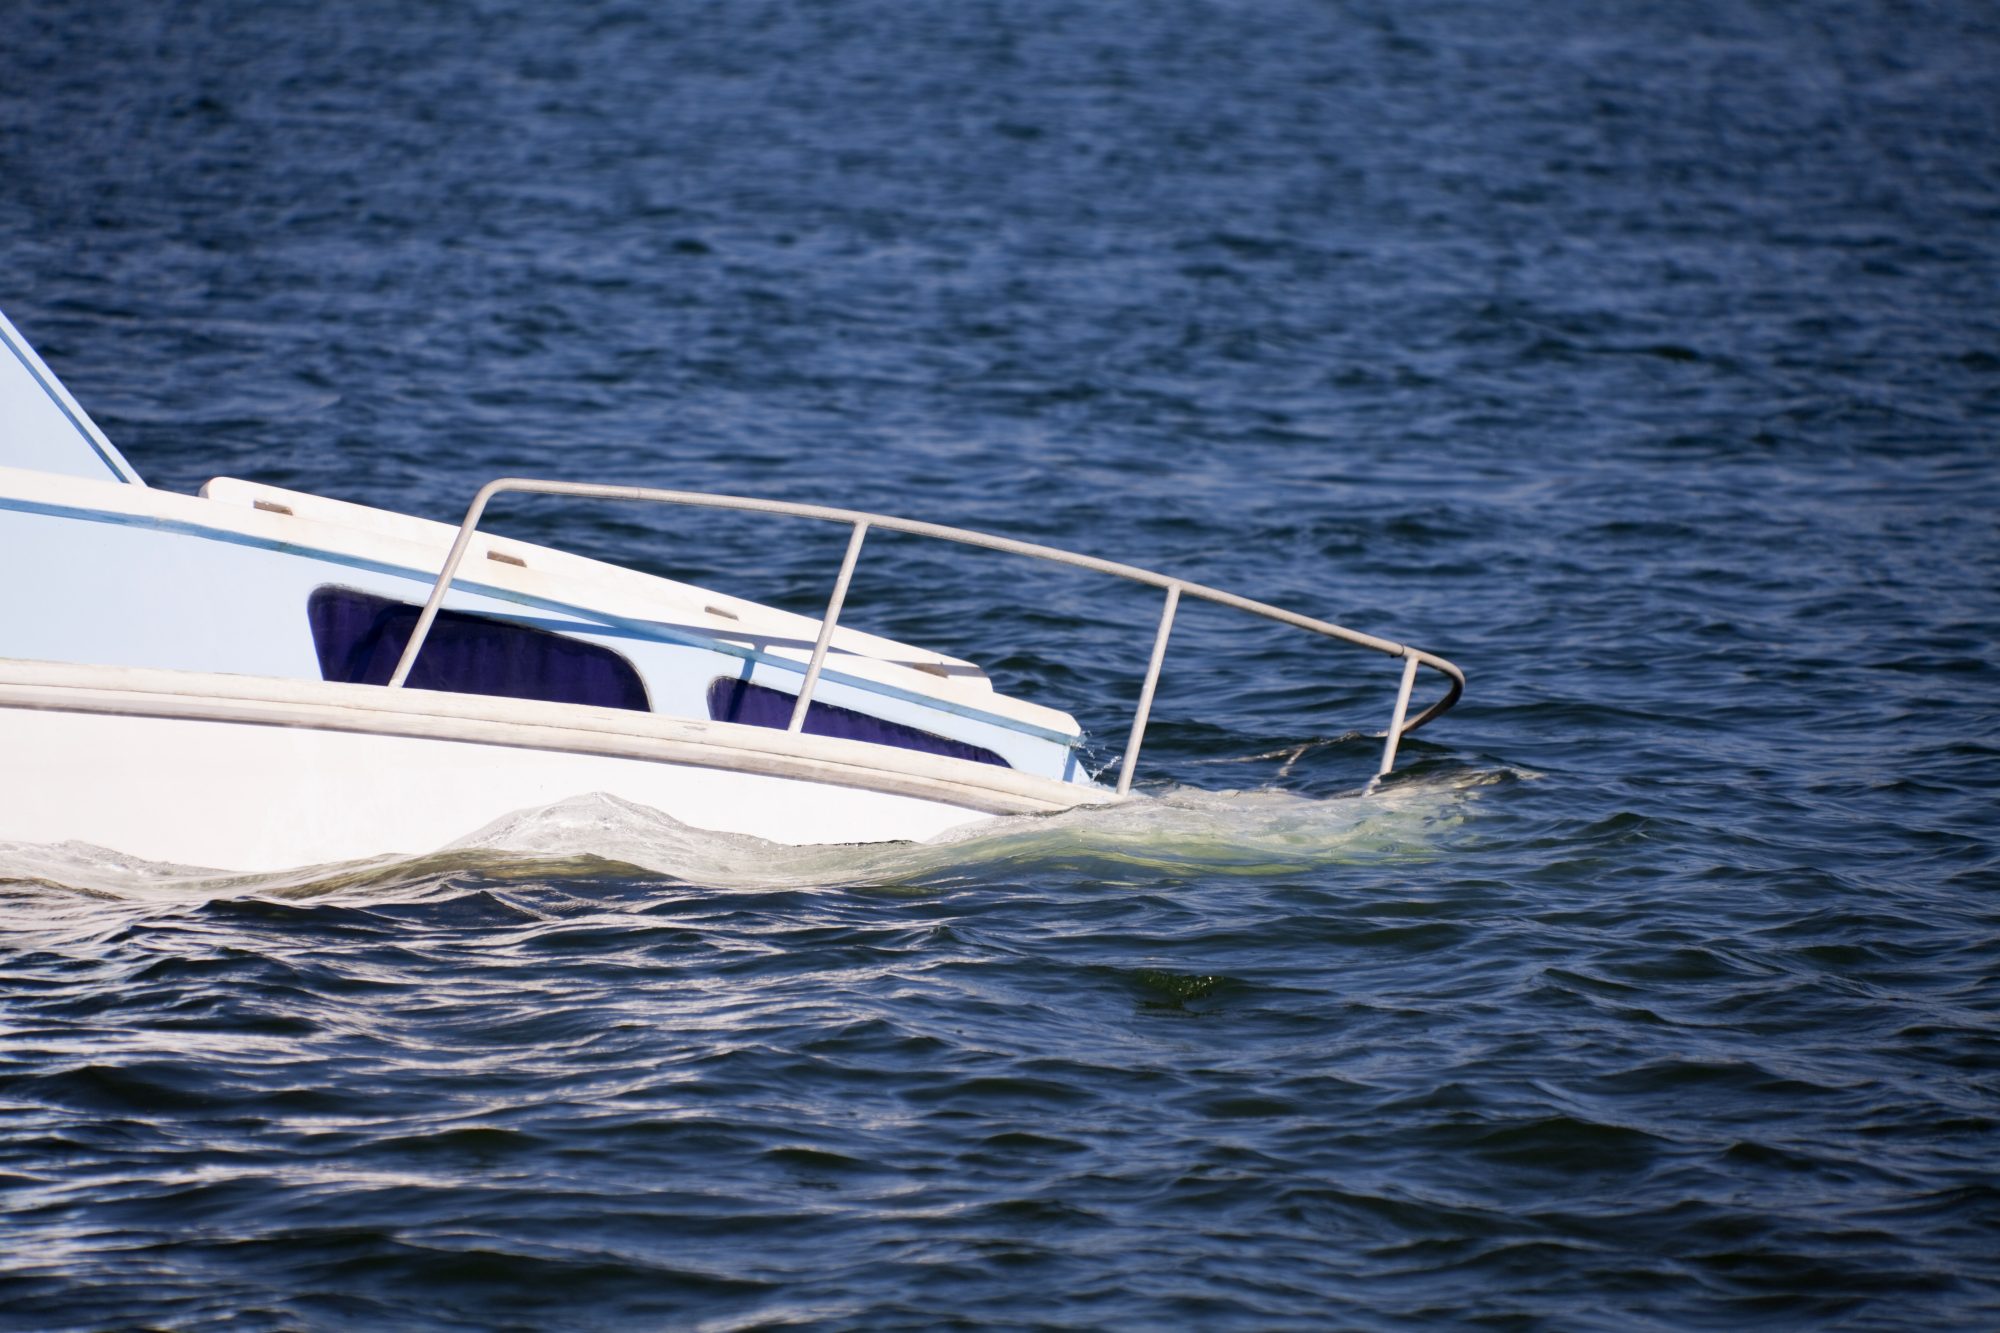 A boat is almost entirely submerged after an accident on the water.